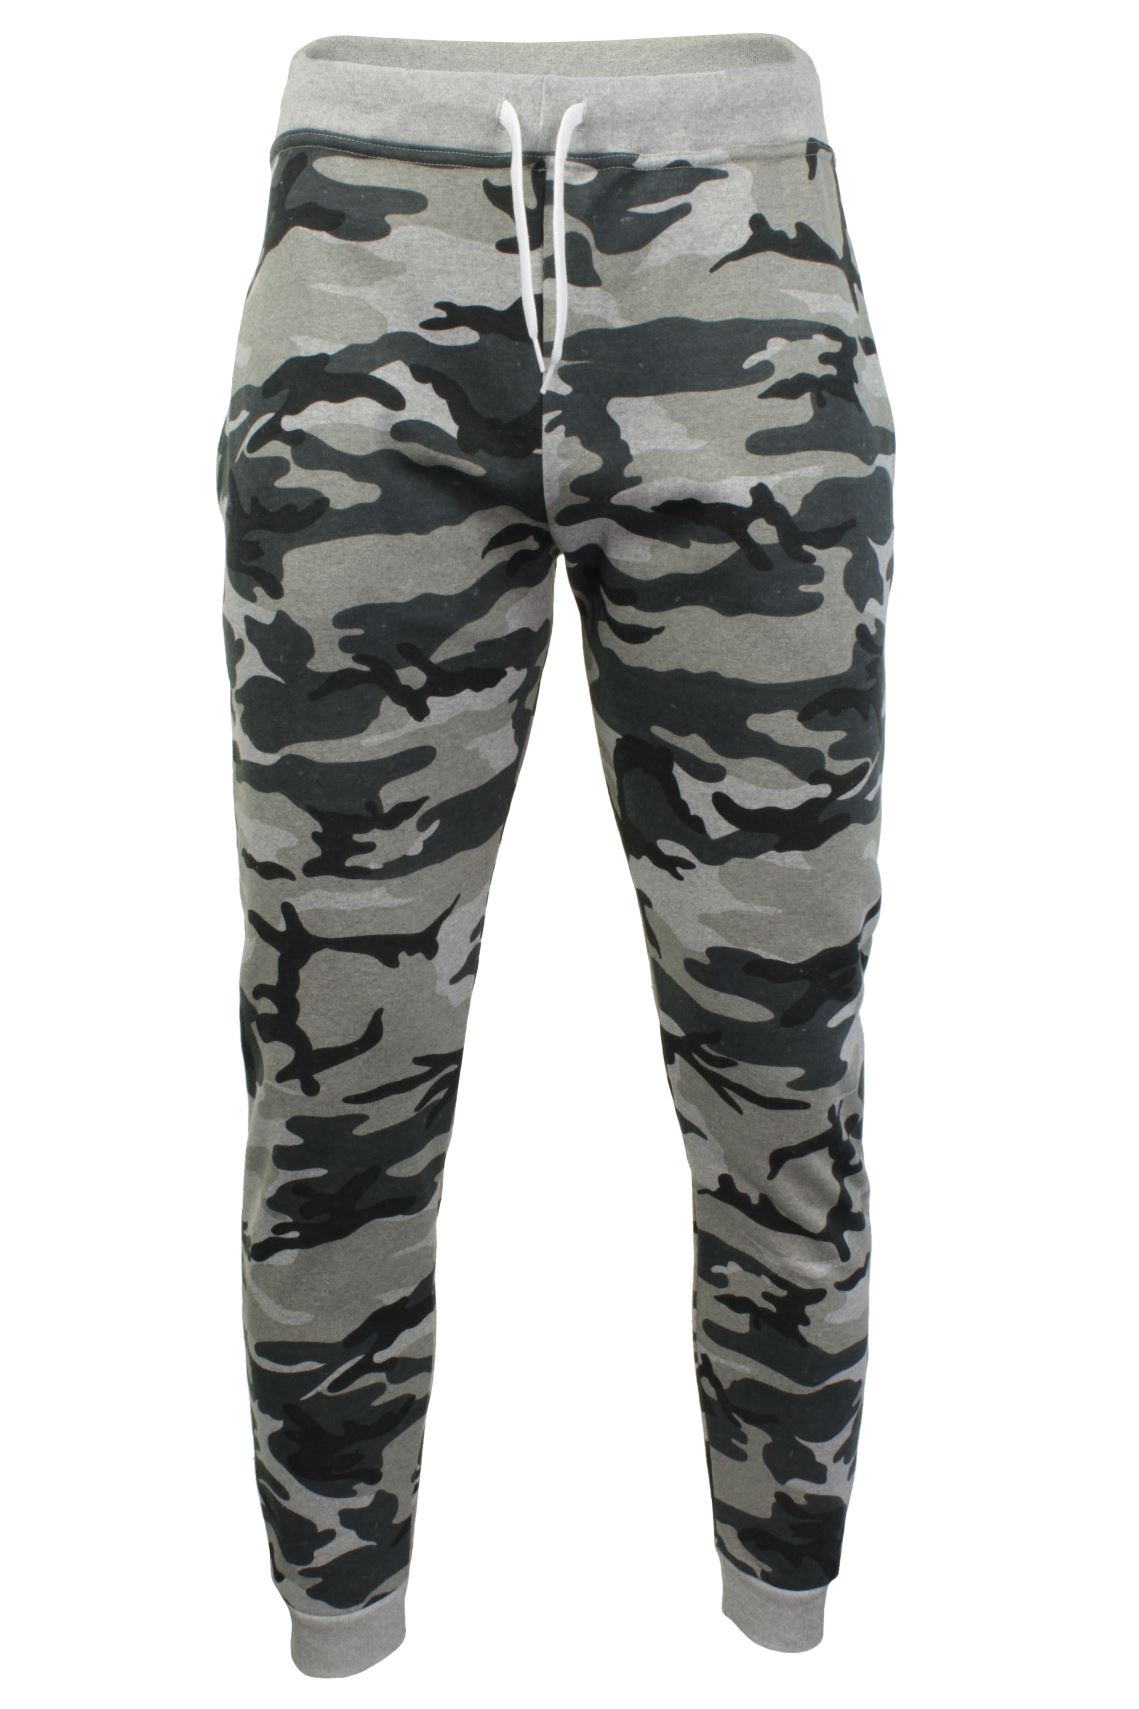 Mens Camouflage Print Joggers/ Gym Running Pants - Skinny Fit - by Xact, 01, Xjg-0002_Camo, Grey